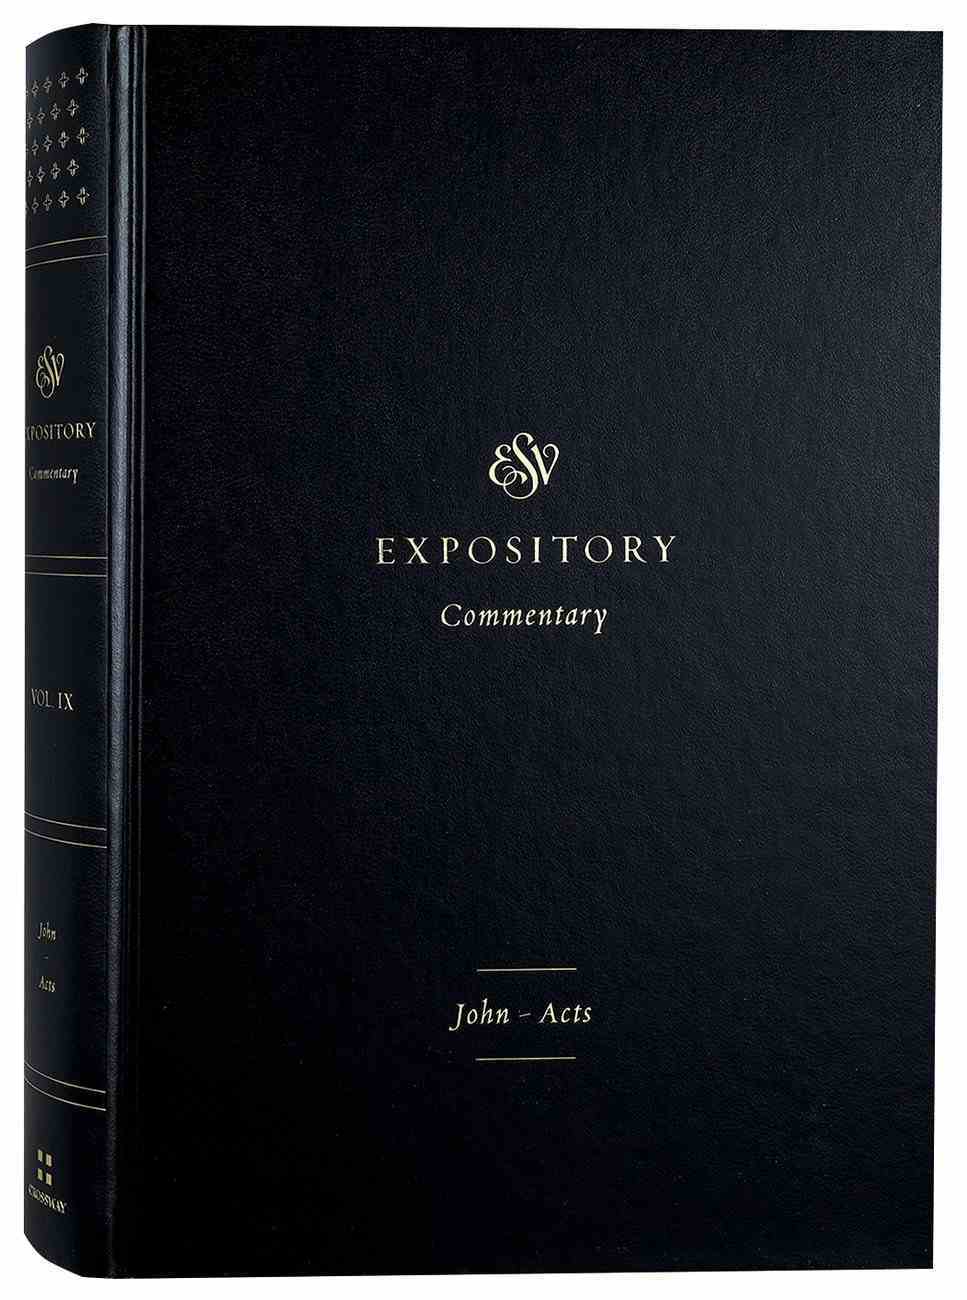 John-Acts (#09 in Esv Expository Commentary Series) Hardback